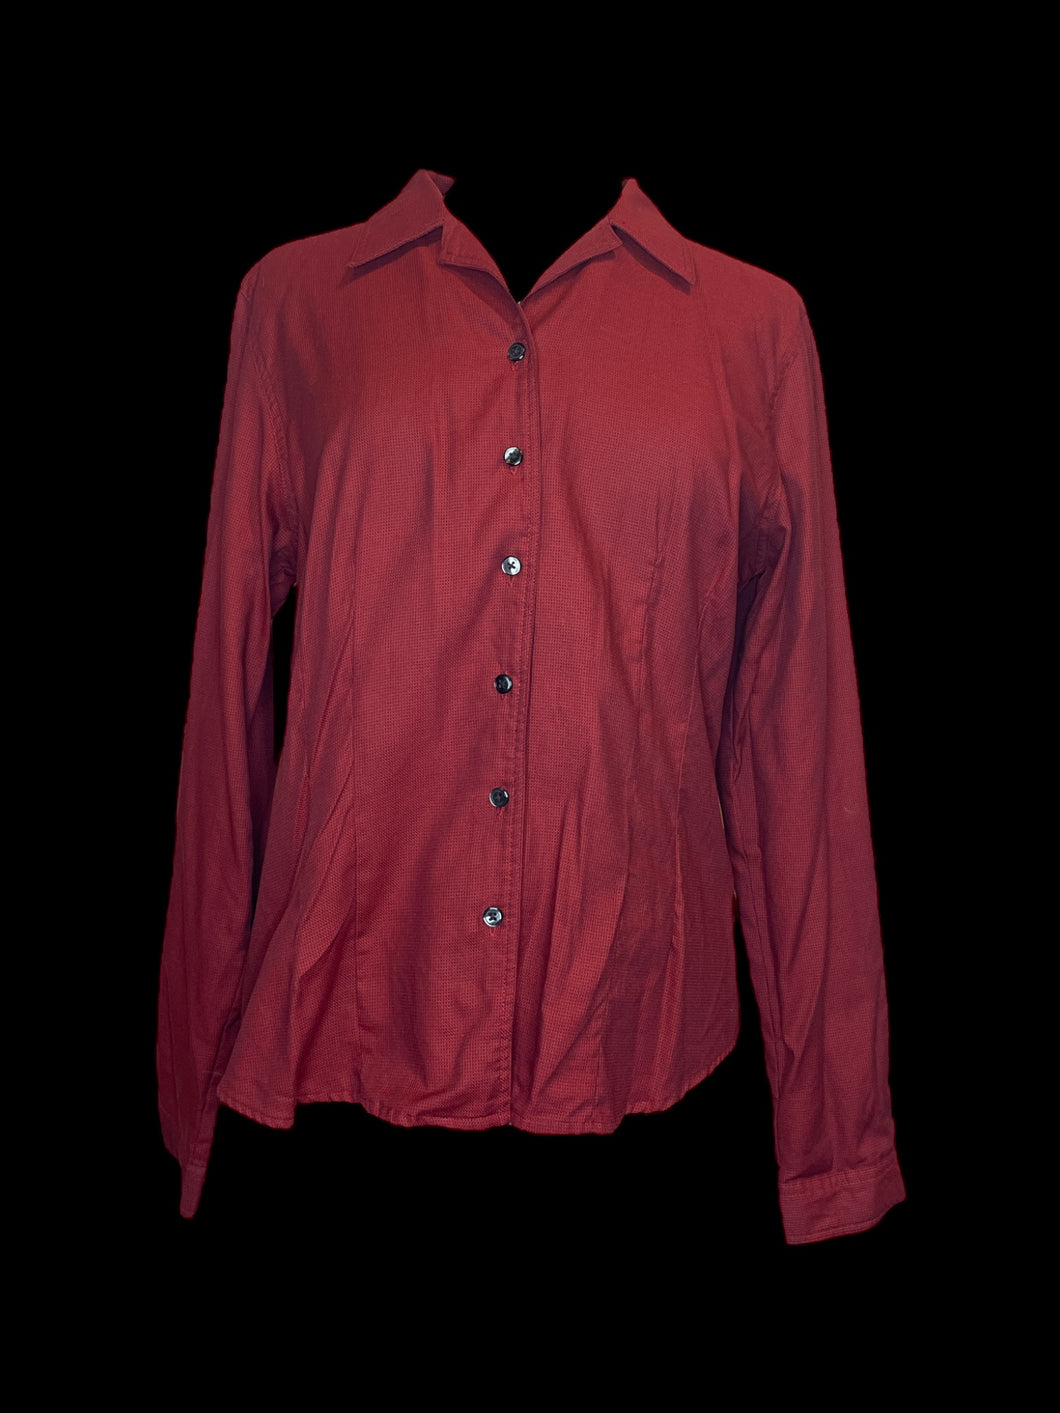 L Red & black micro x pattern long sleeve button down cotton top w/ black buttons, folded collar, button cuffs,